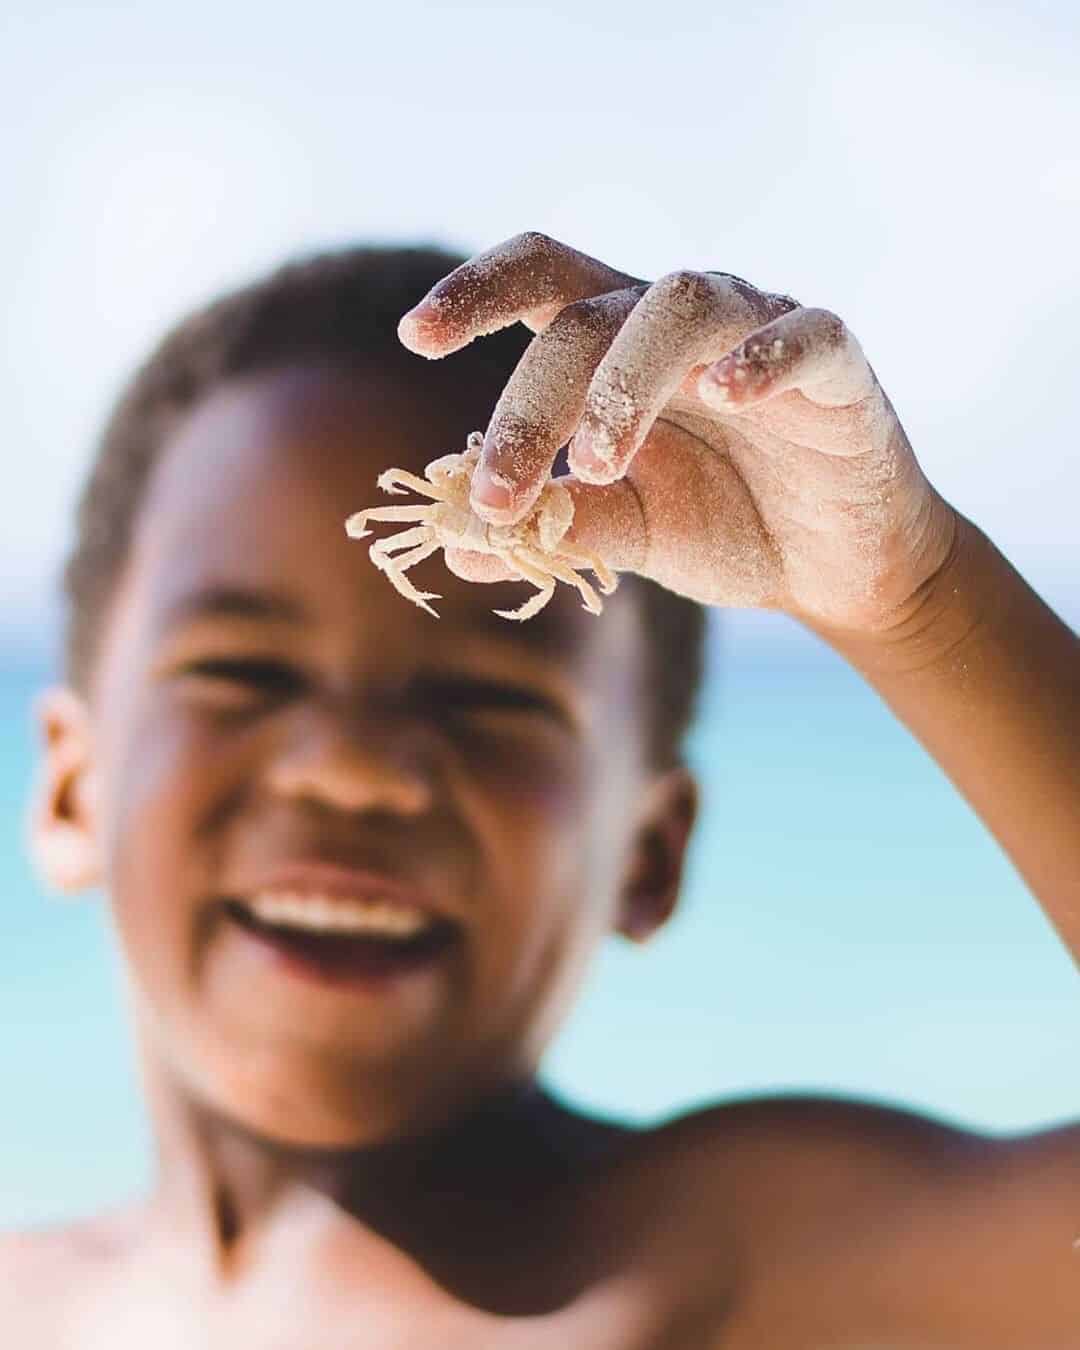 advice for helping kids that are scared of bugs, snakes and other creepy-crawlies